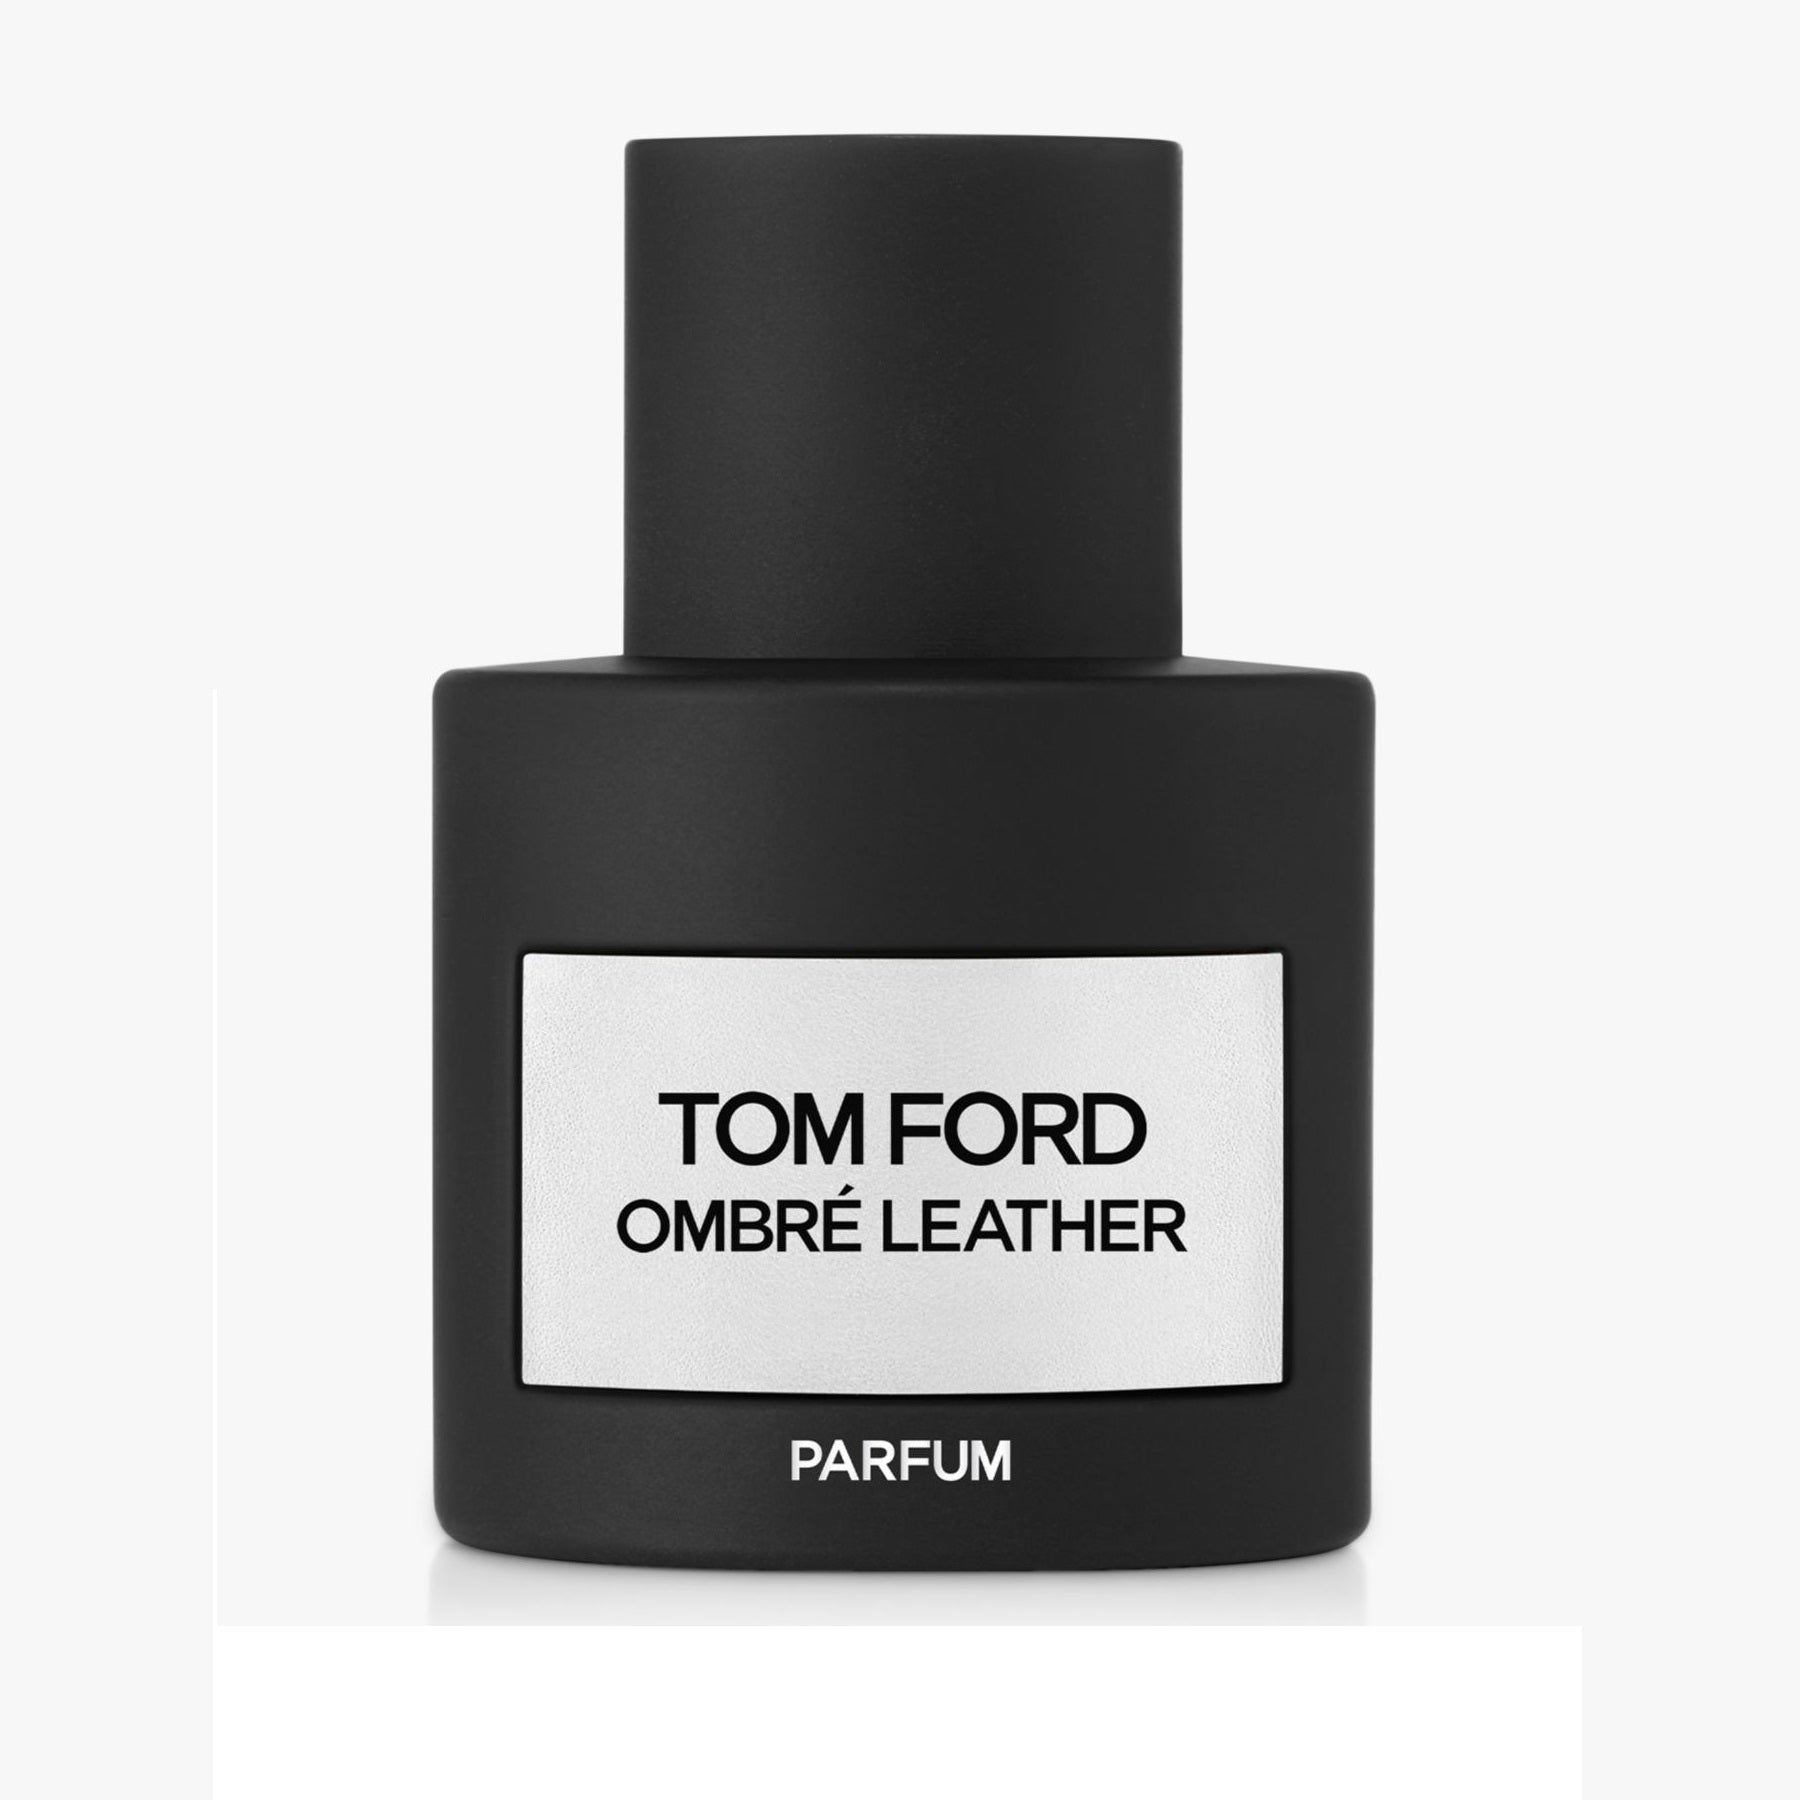 Tom Ford Ombre Leather Parfum Spray 50ml